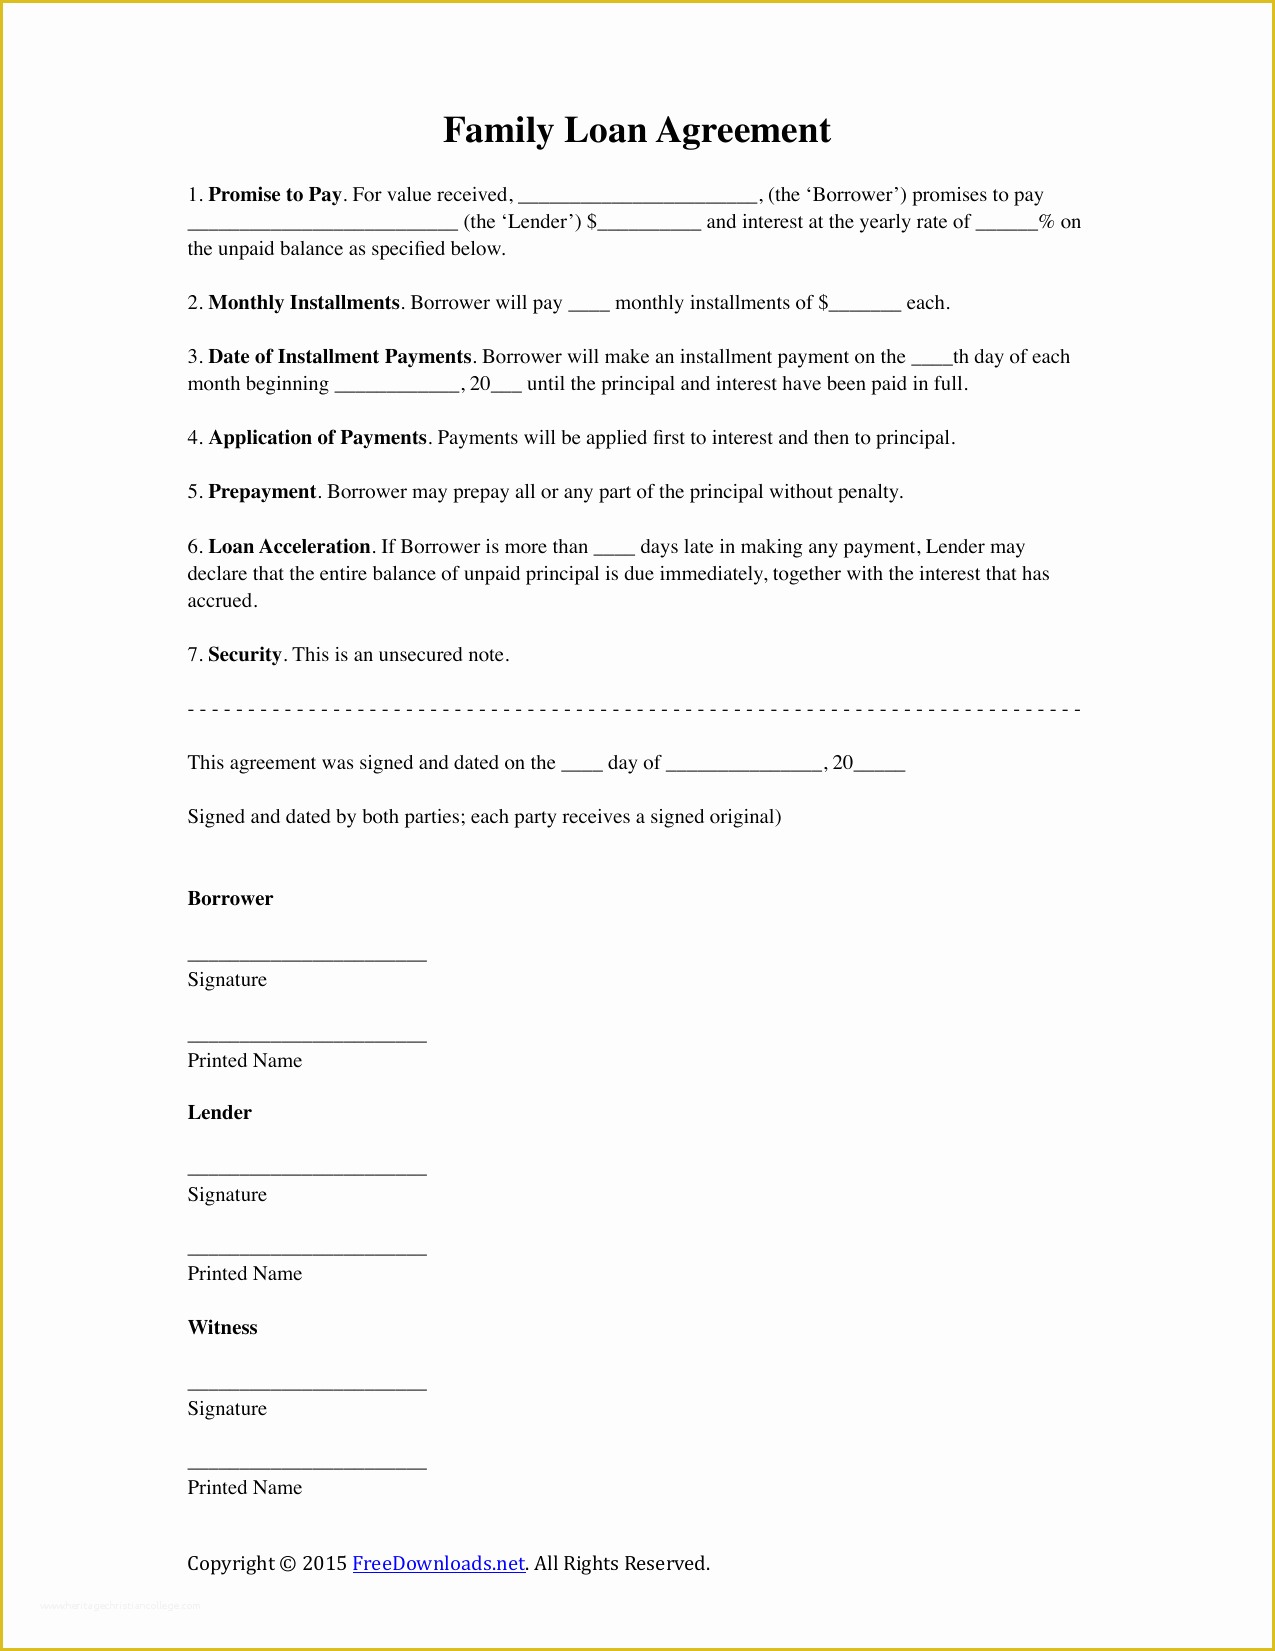 Free Loan Agreement Template Of Download Family Loan Agreement Template Pdf Rtf